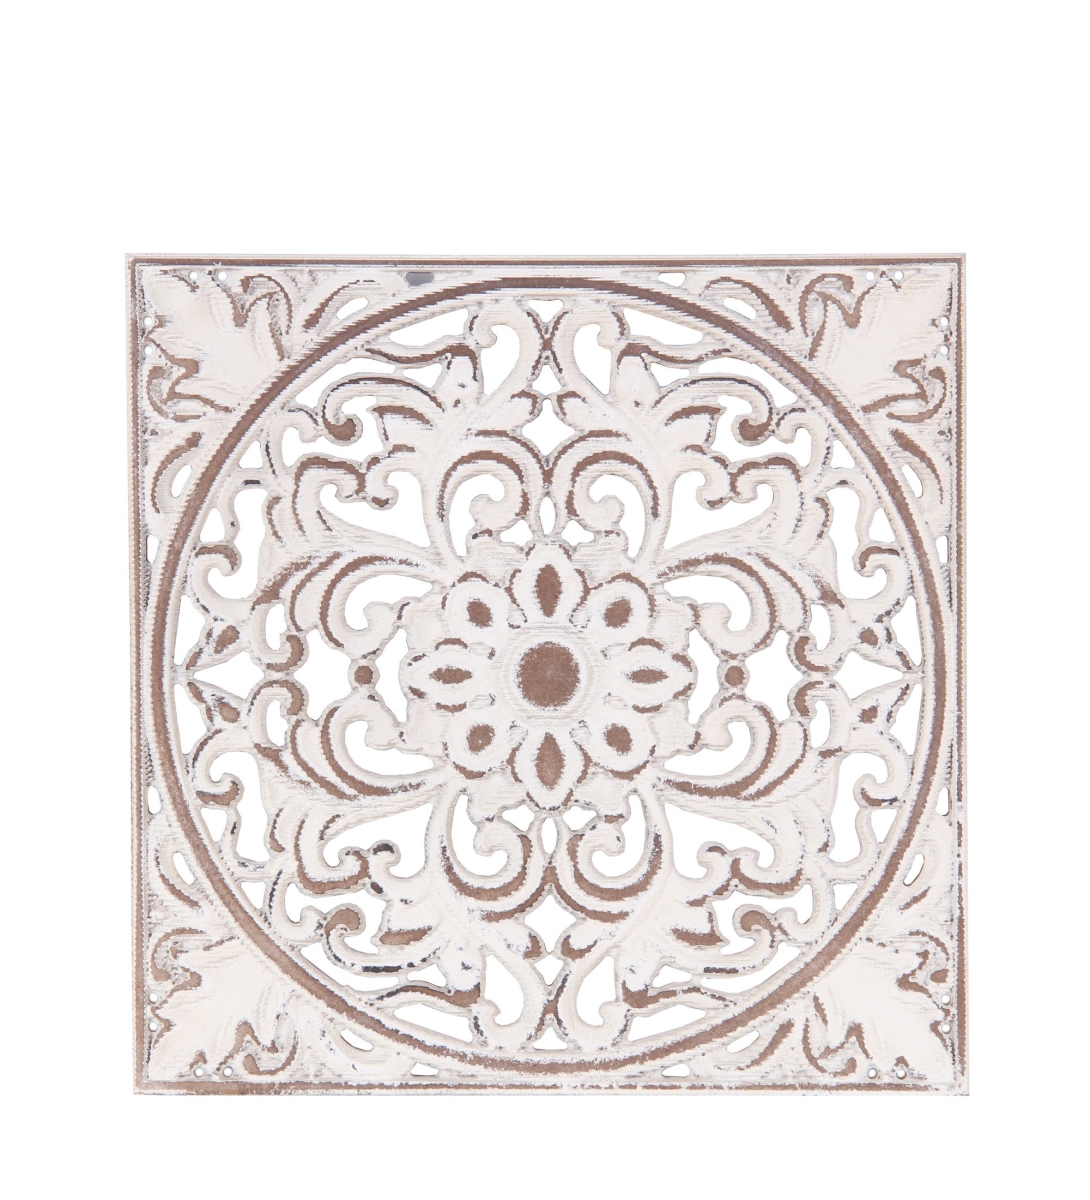 30148 12 X 0.5 X 12 In. Carved Wood Wall Decor, Off-white